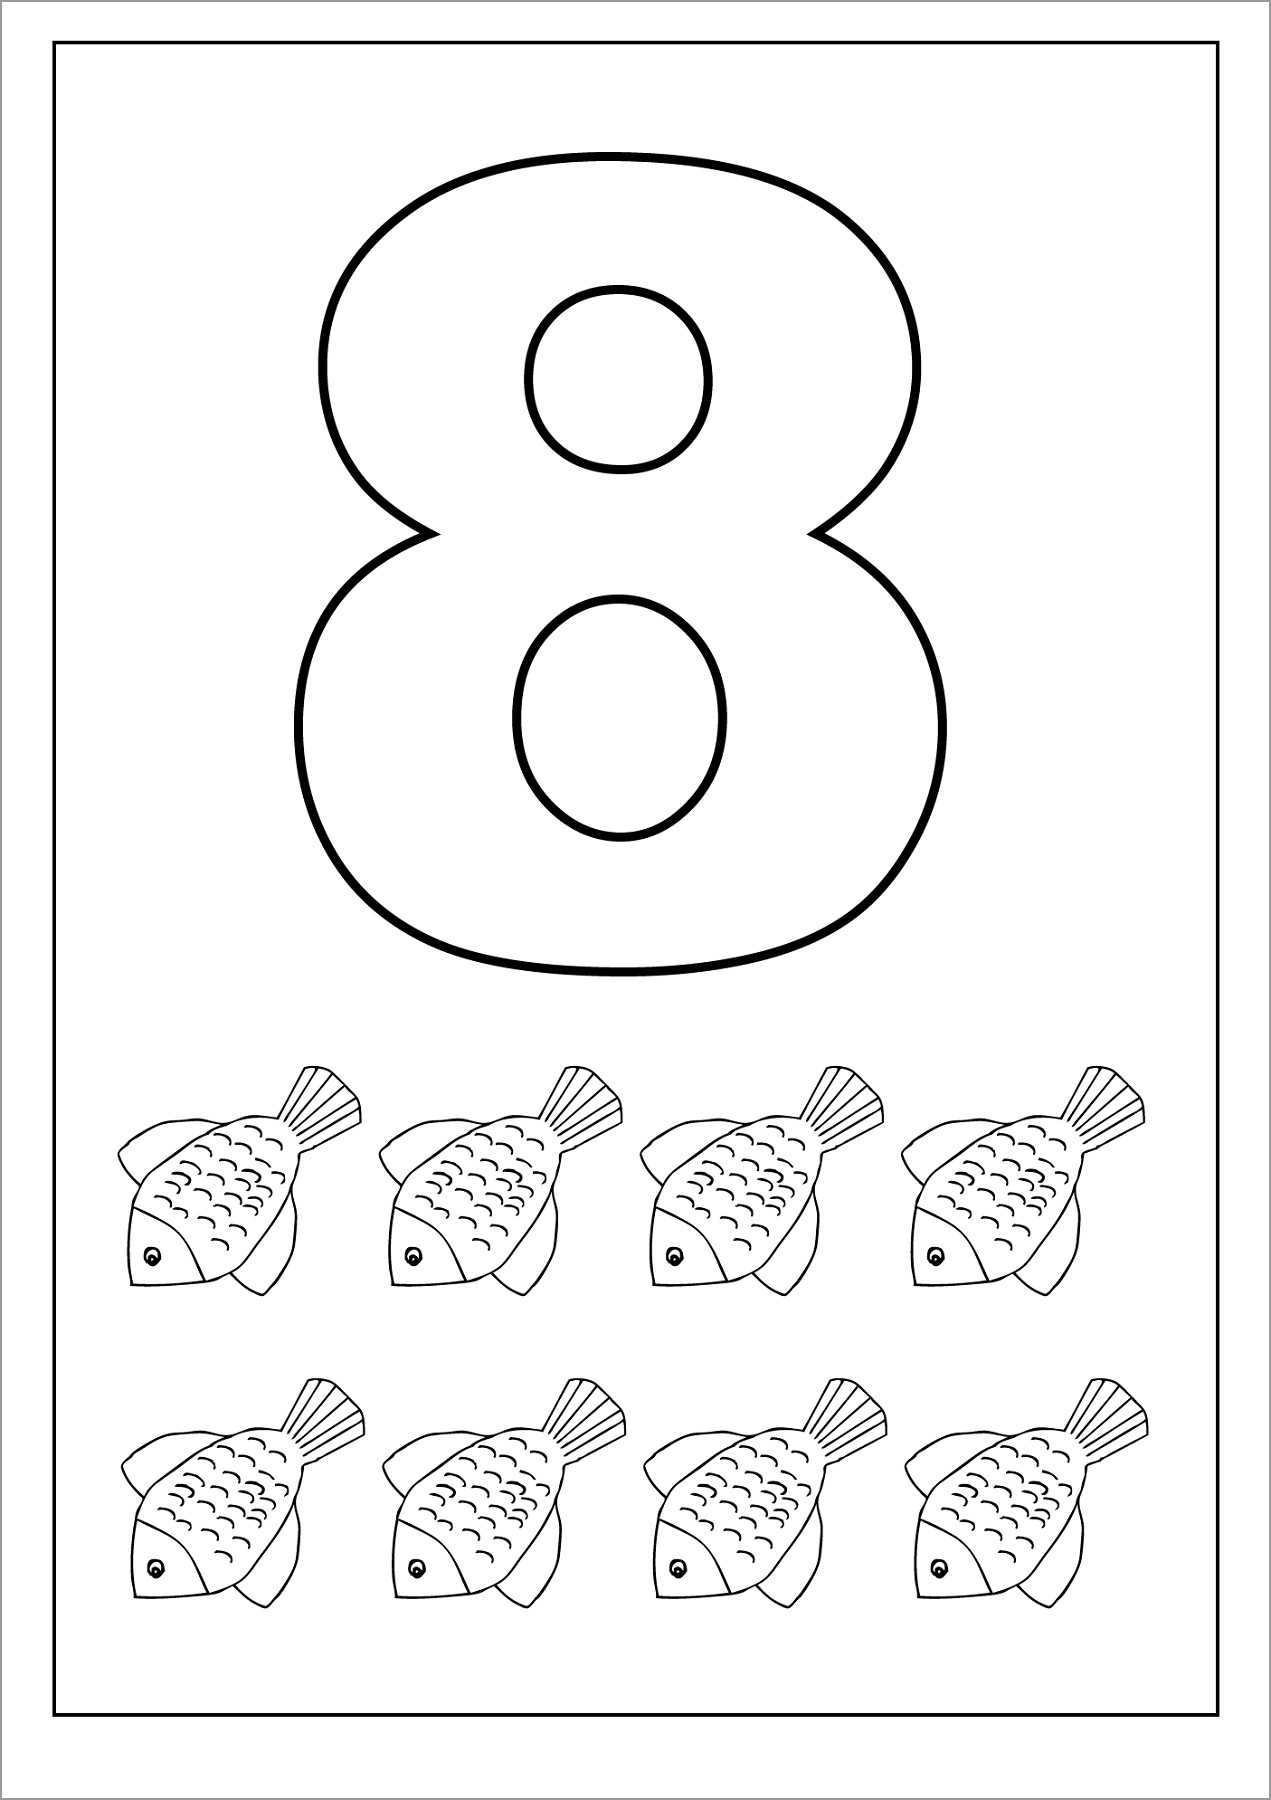 Number 8 Fish Coloring Page